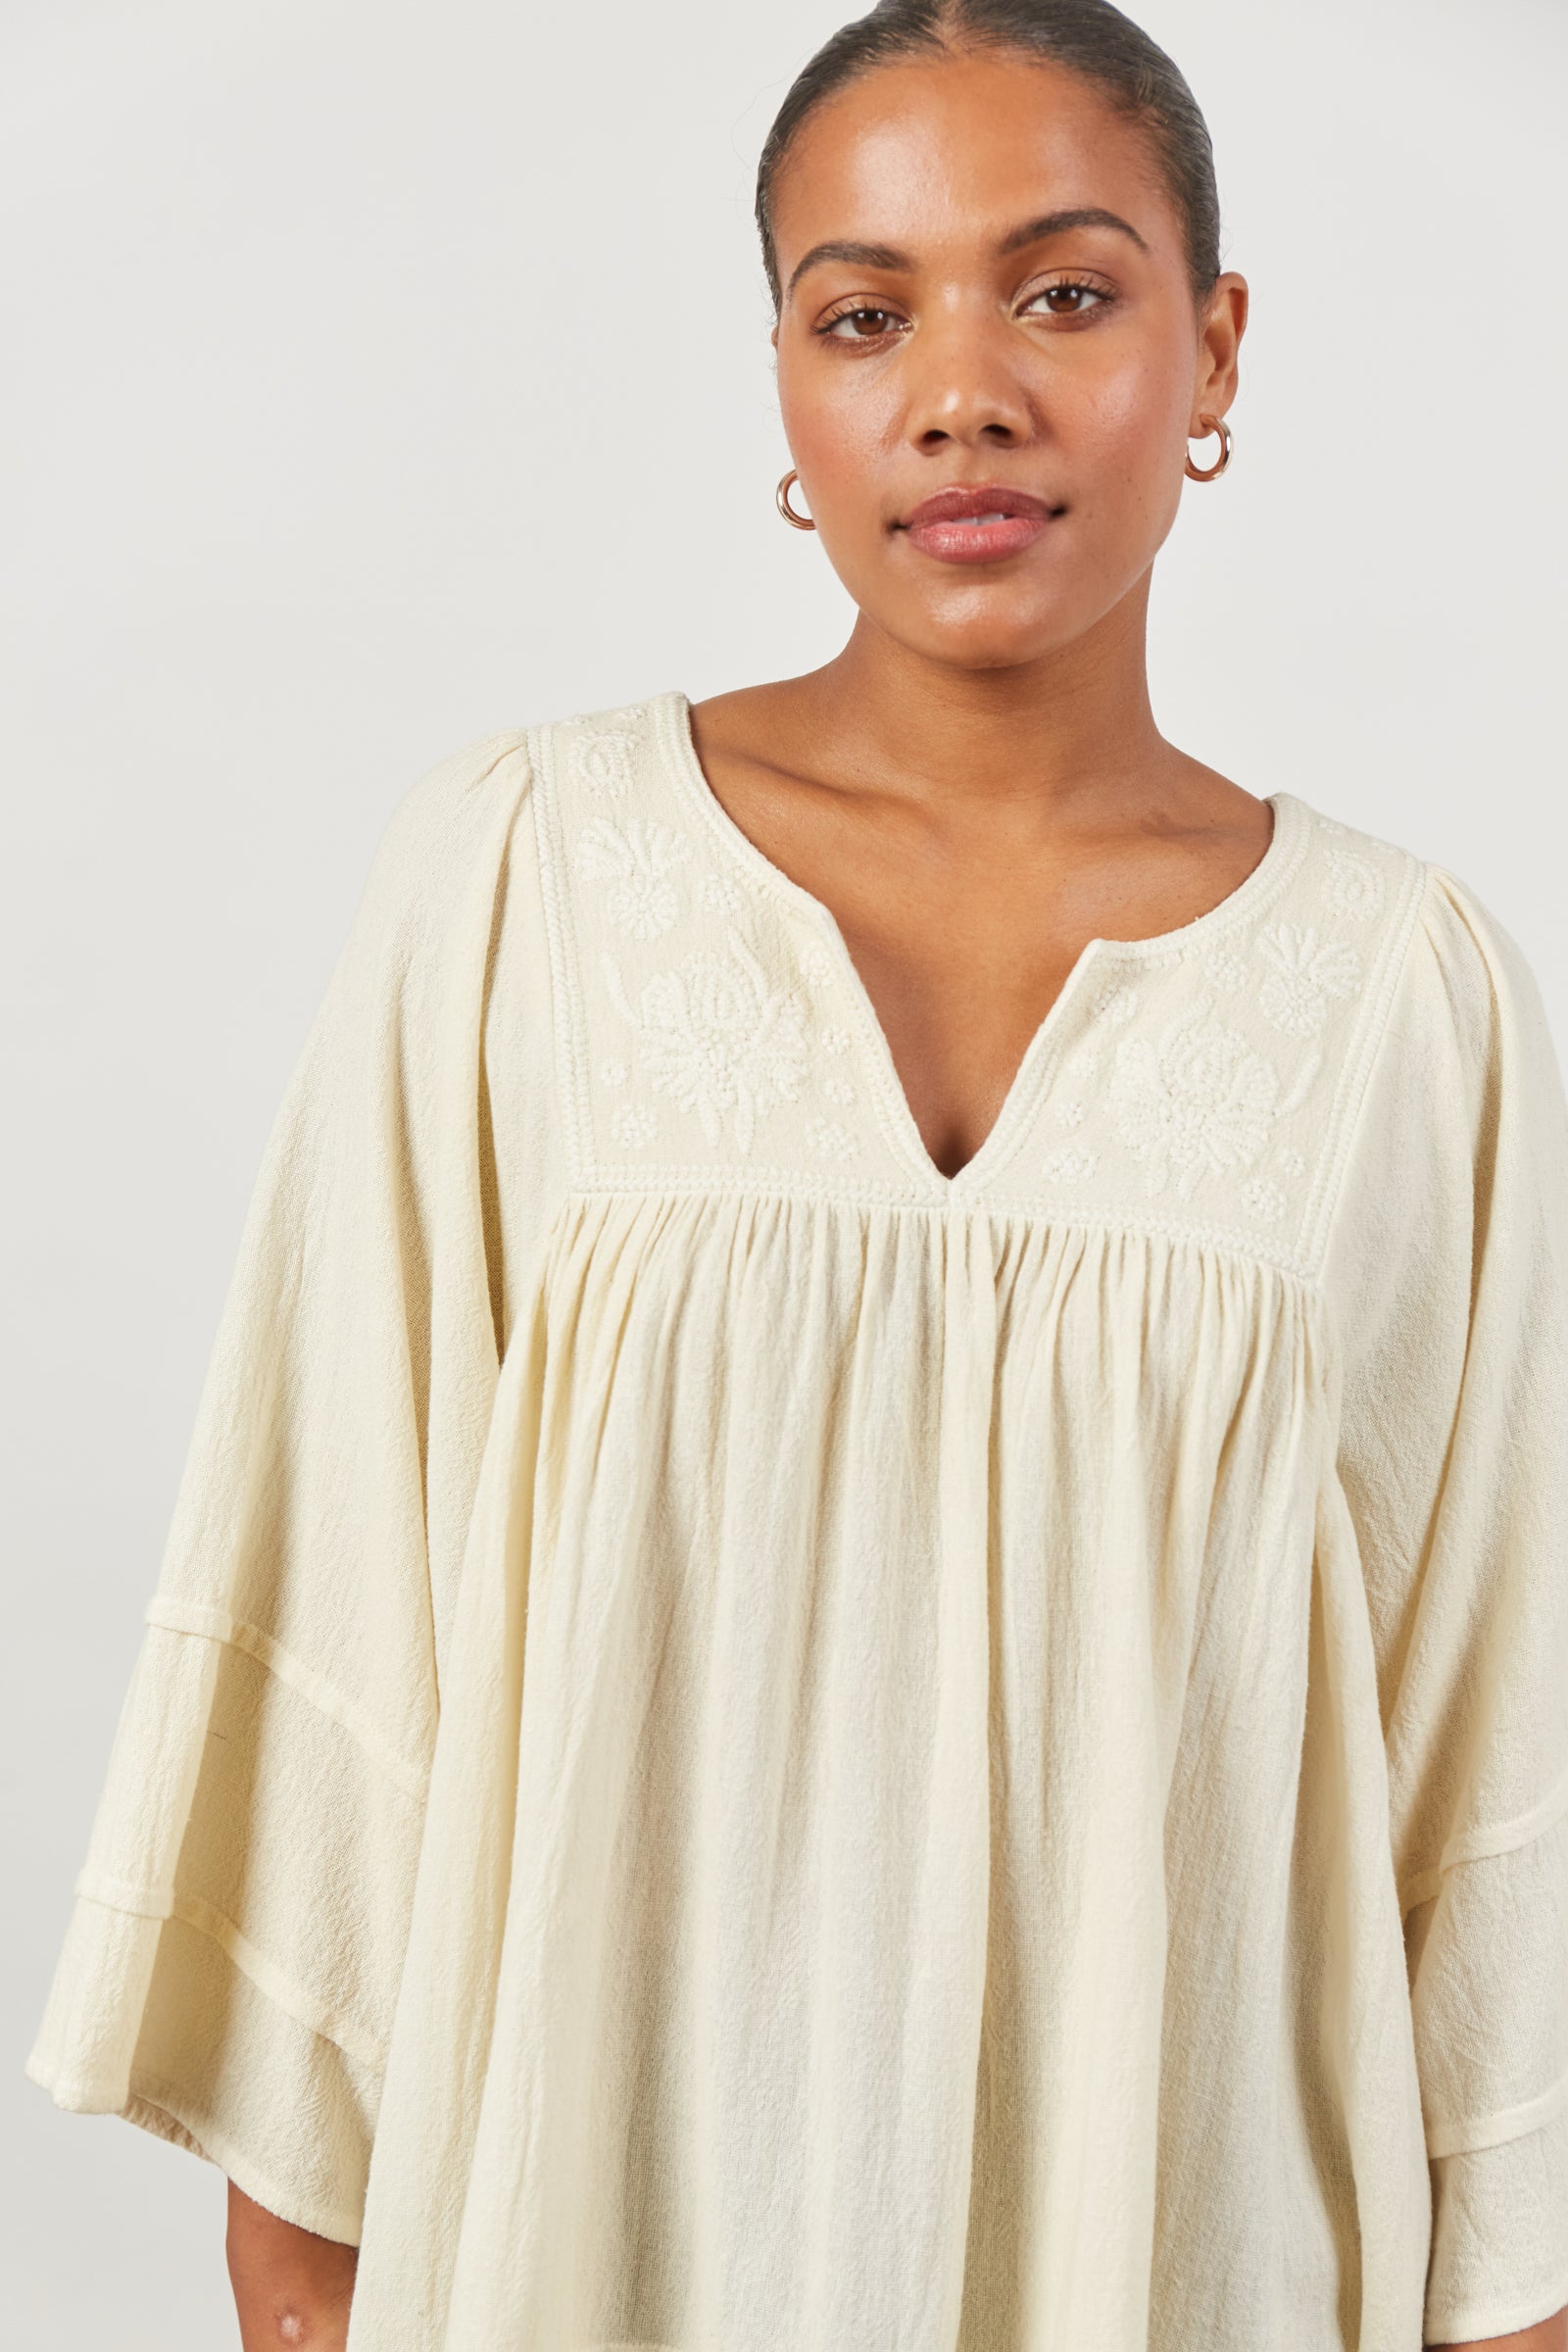 Entice Top/Dress - Creme - Isle of Mine Clothing - Top Dress One Size